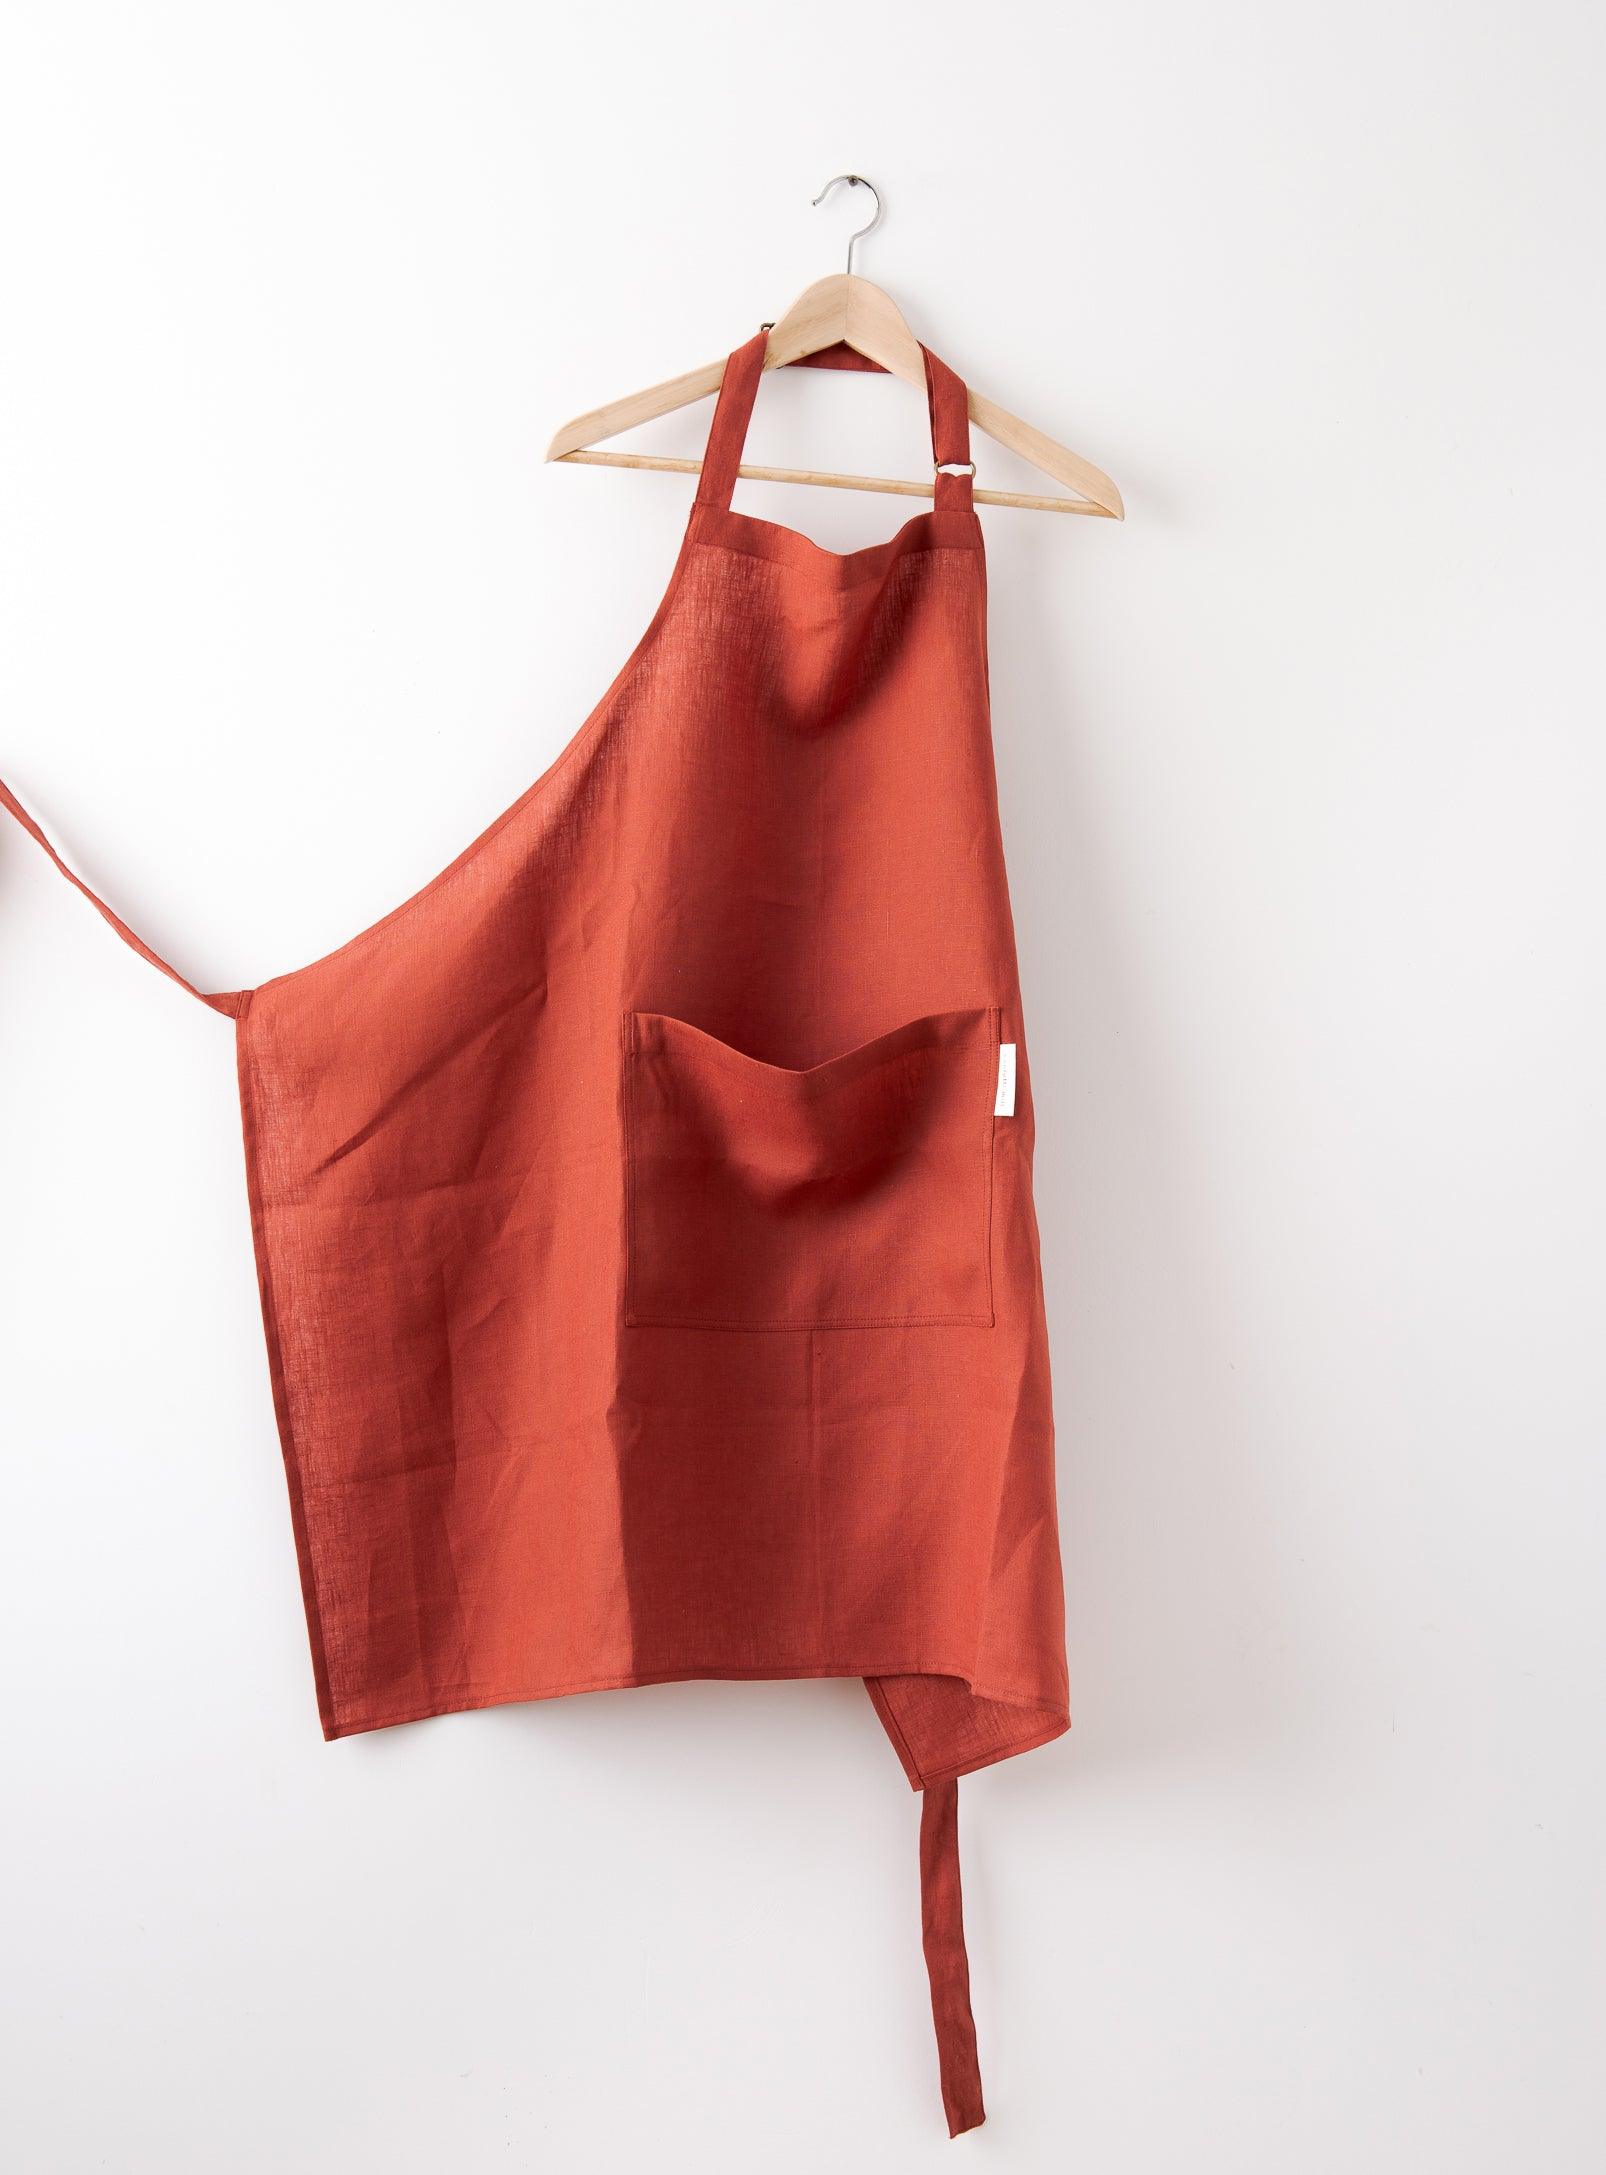 a red apron with pocket in front hung in front of a white wall